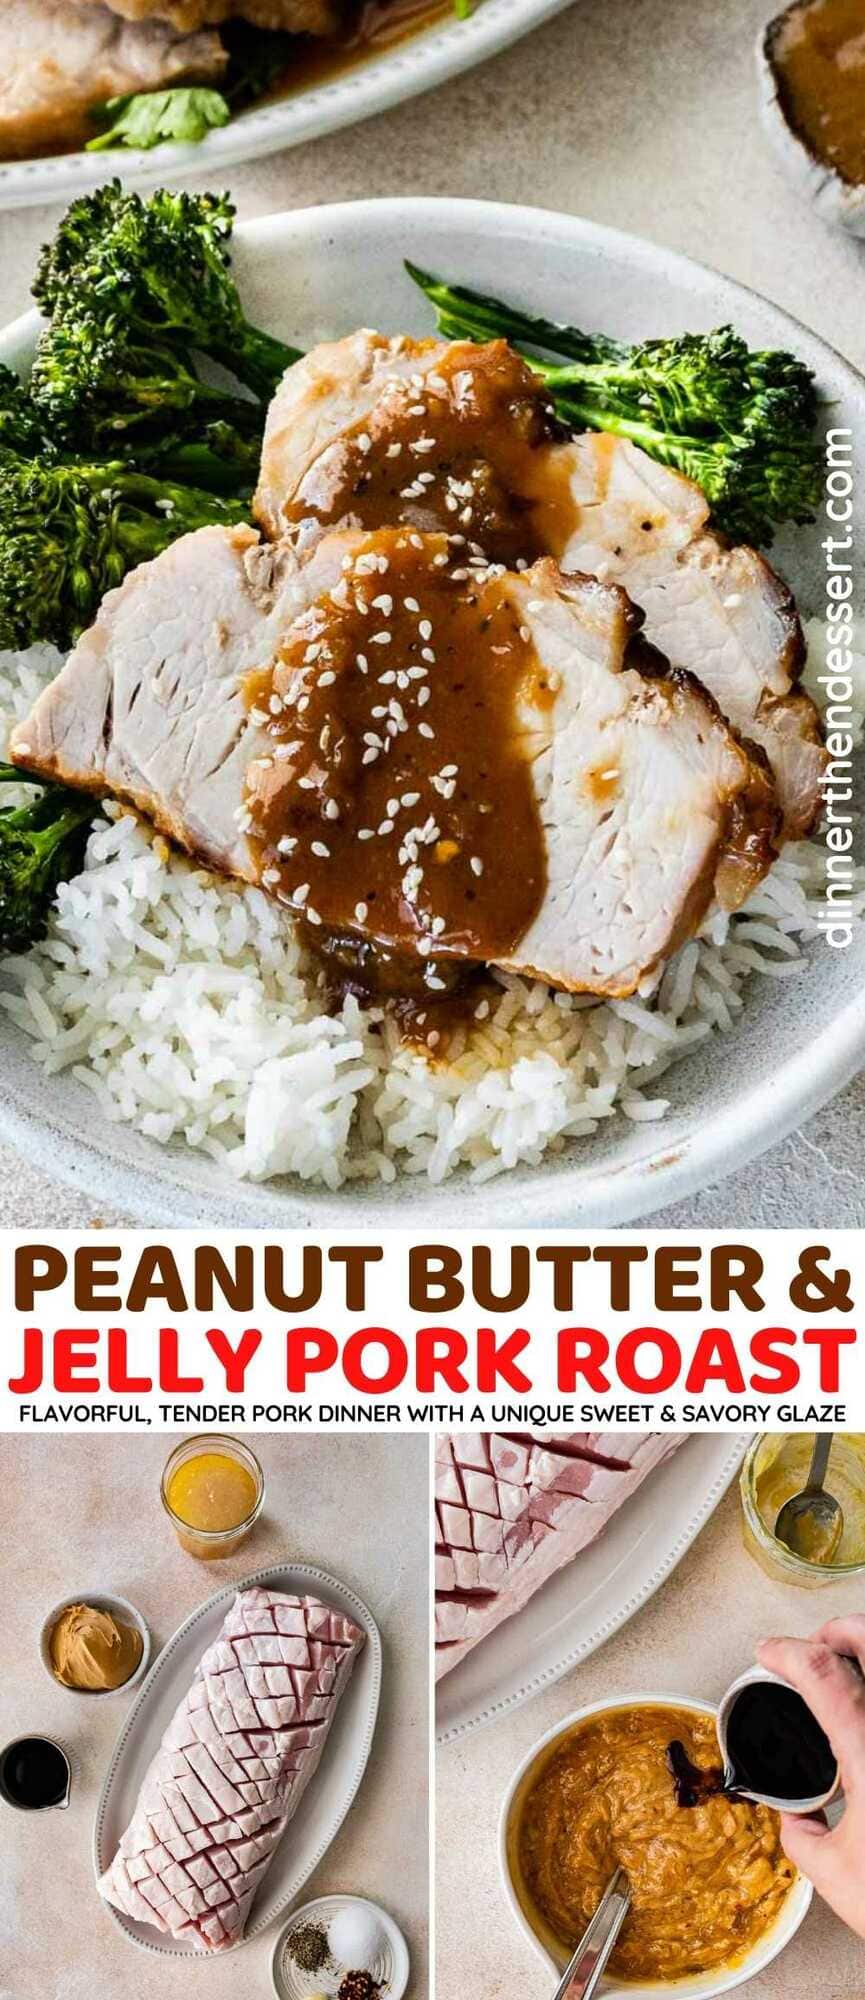 Peanut Butter and Jelly Pork Roast collage